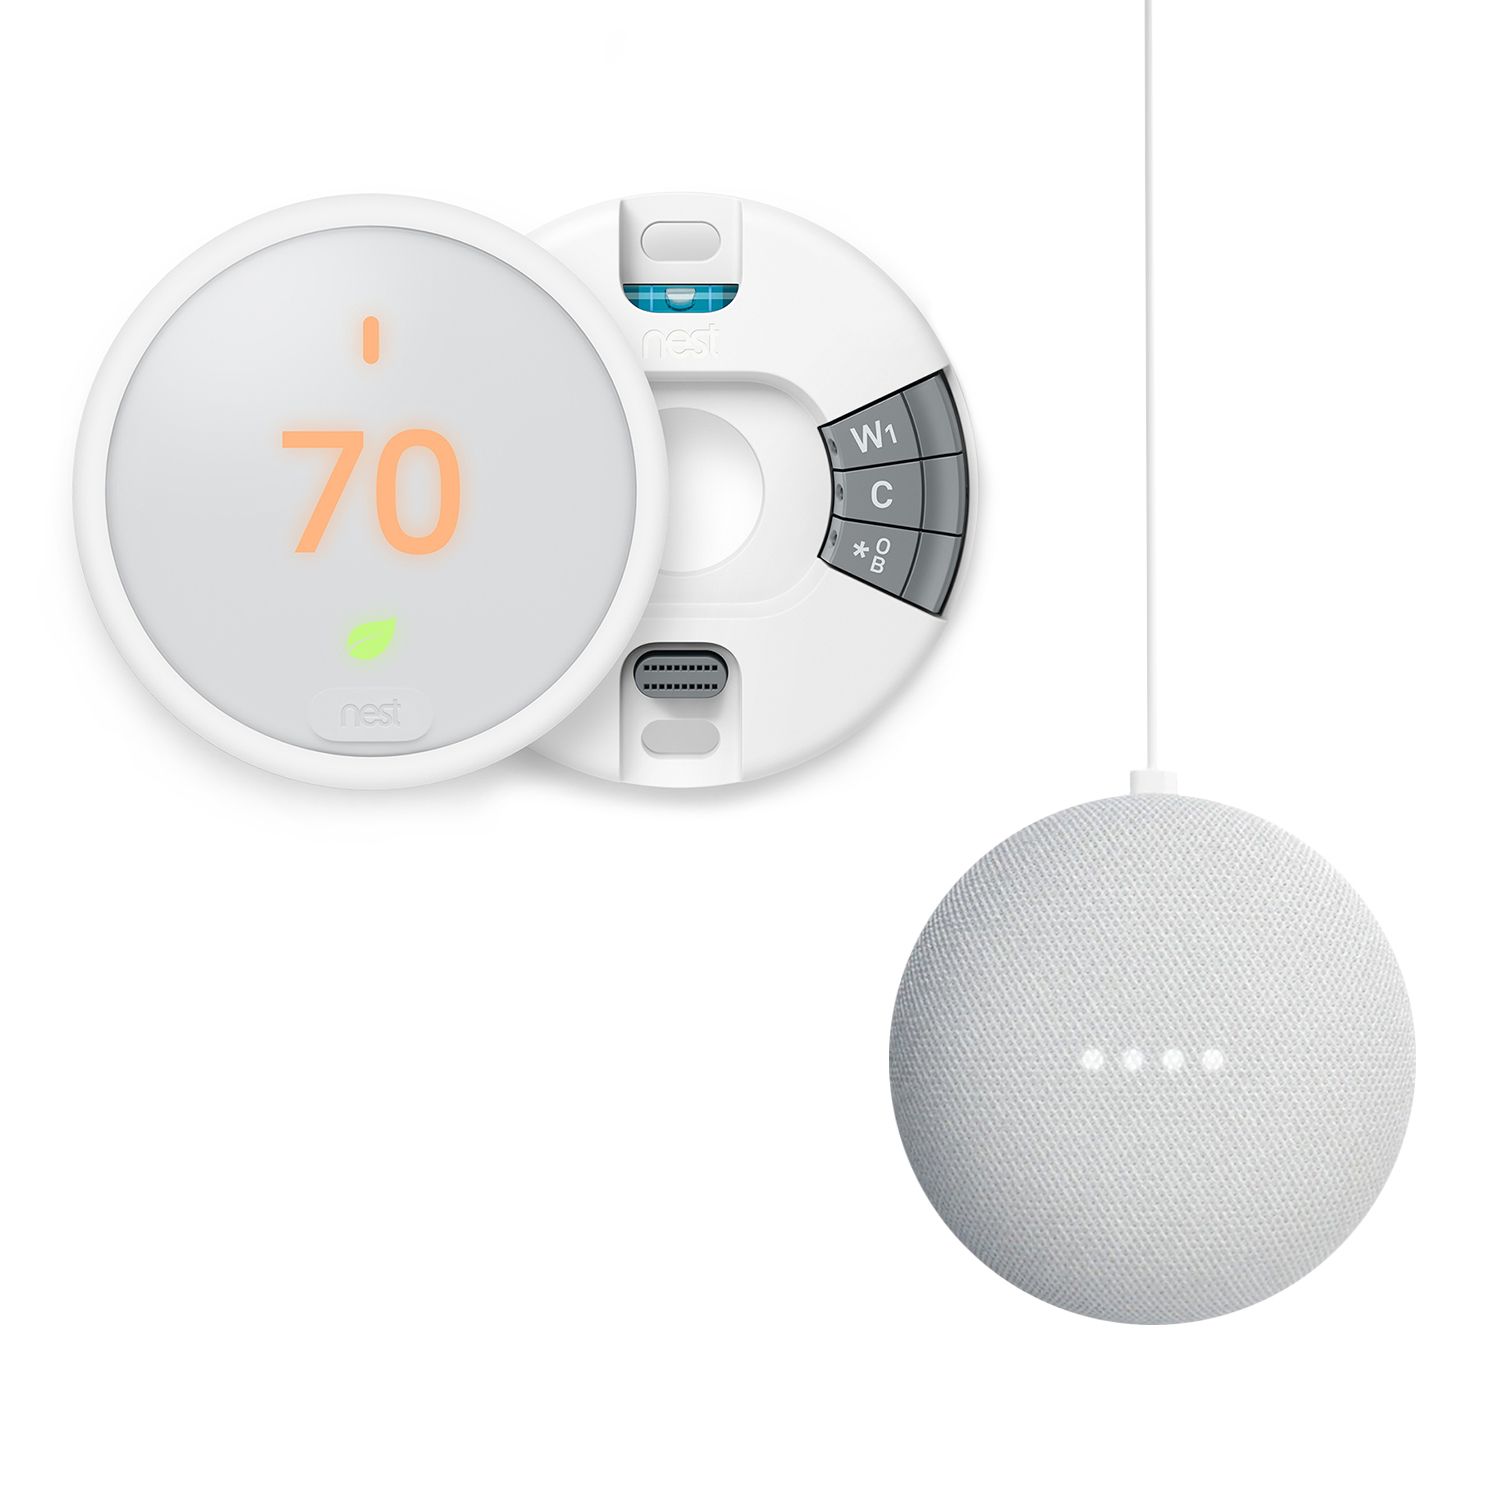 does nest thermostat e work with google home